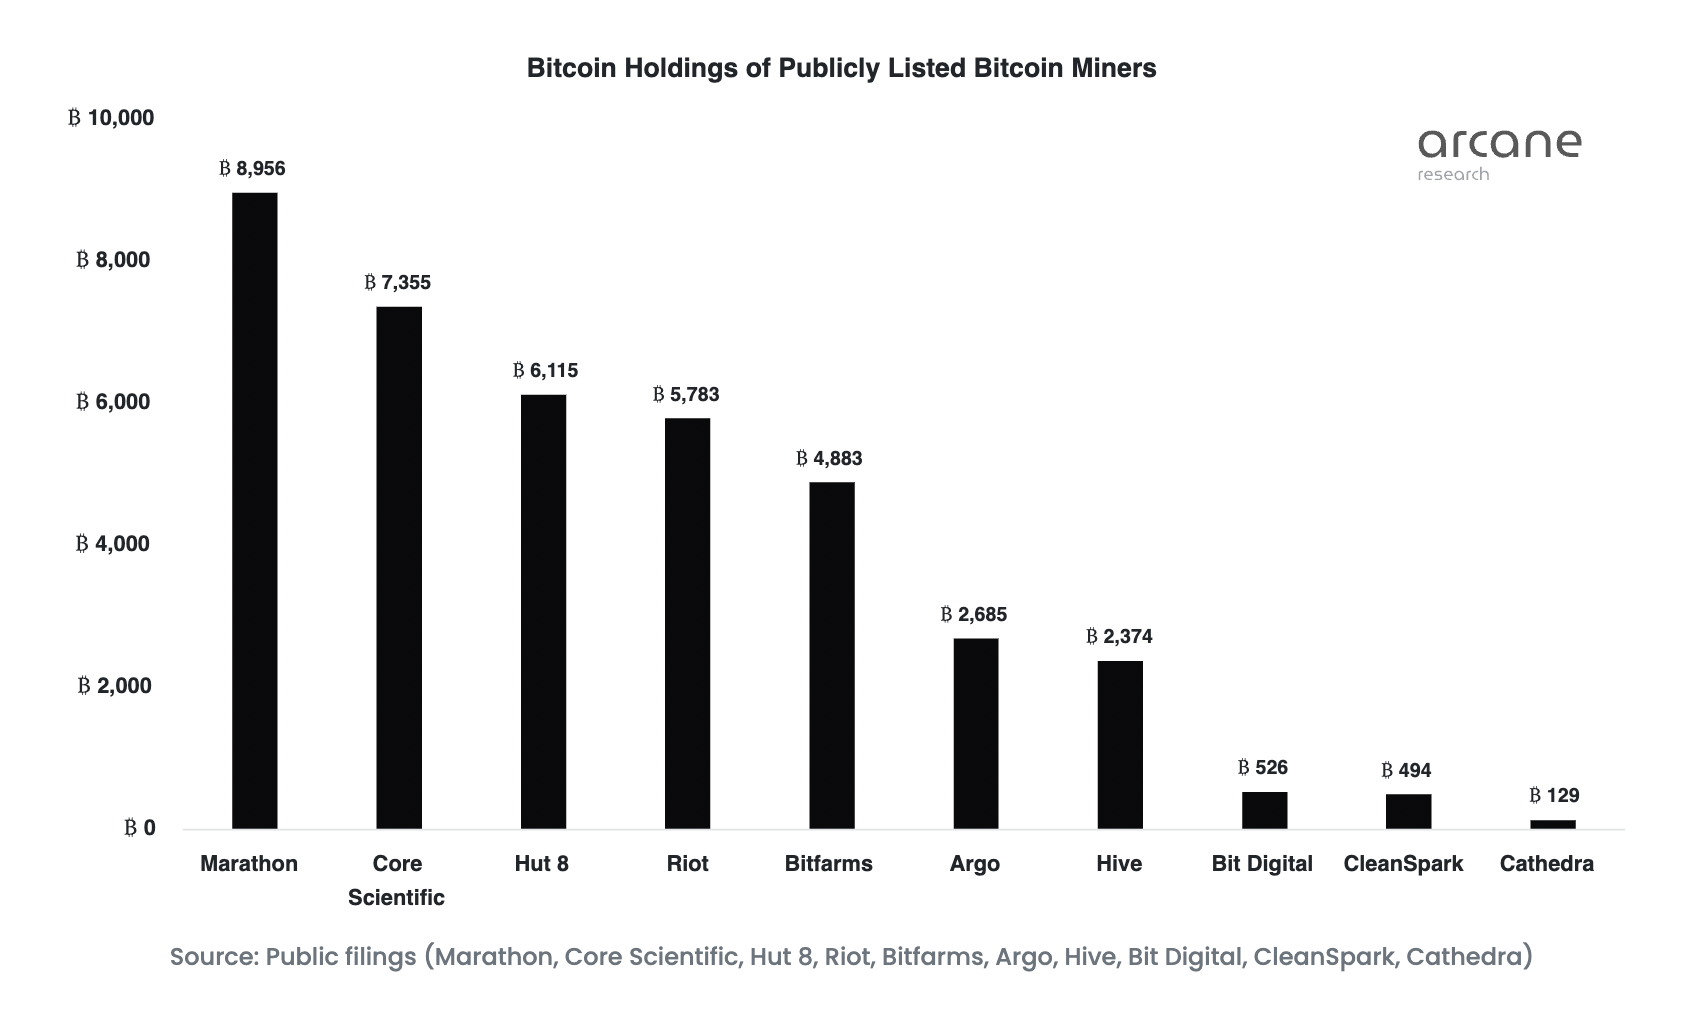 Miners holding most bitcoin